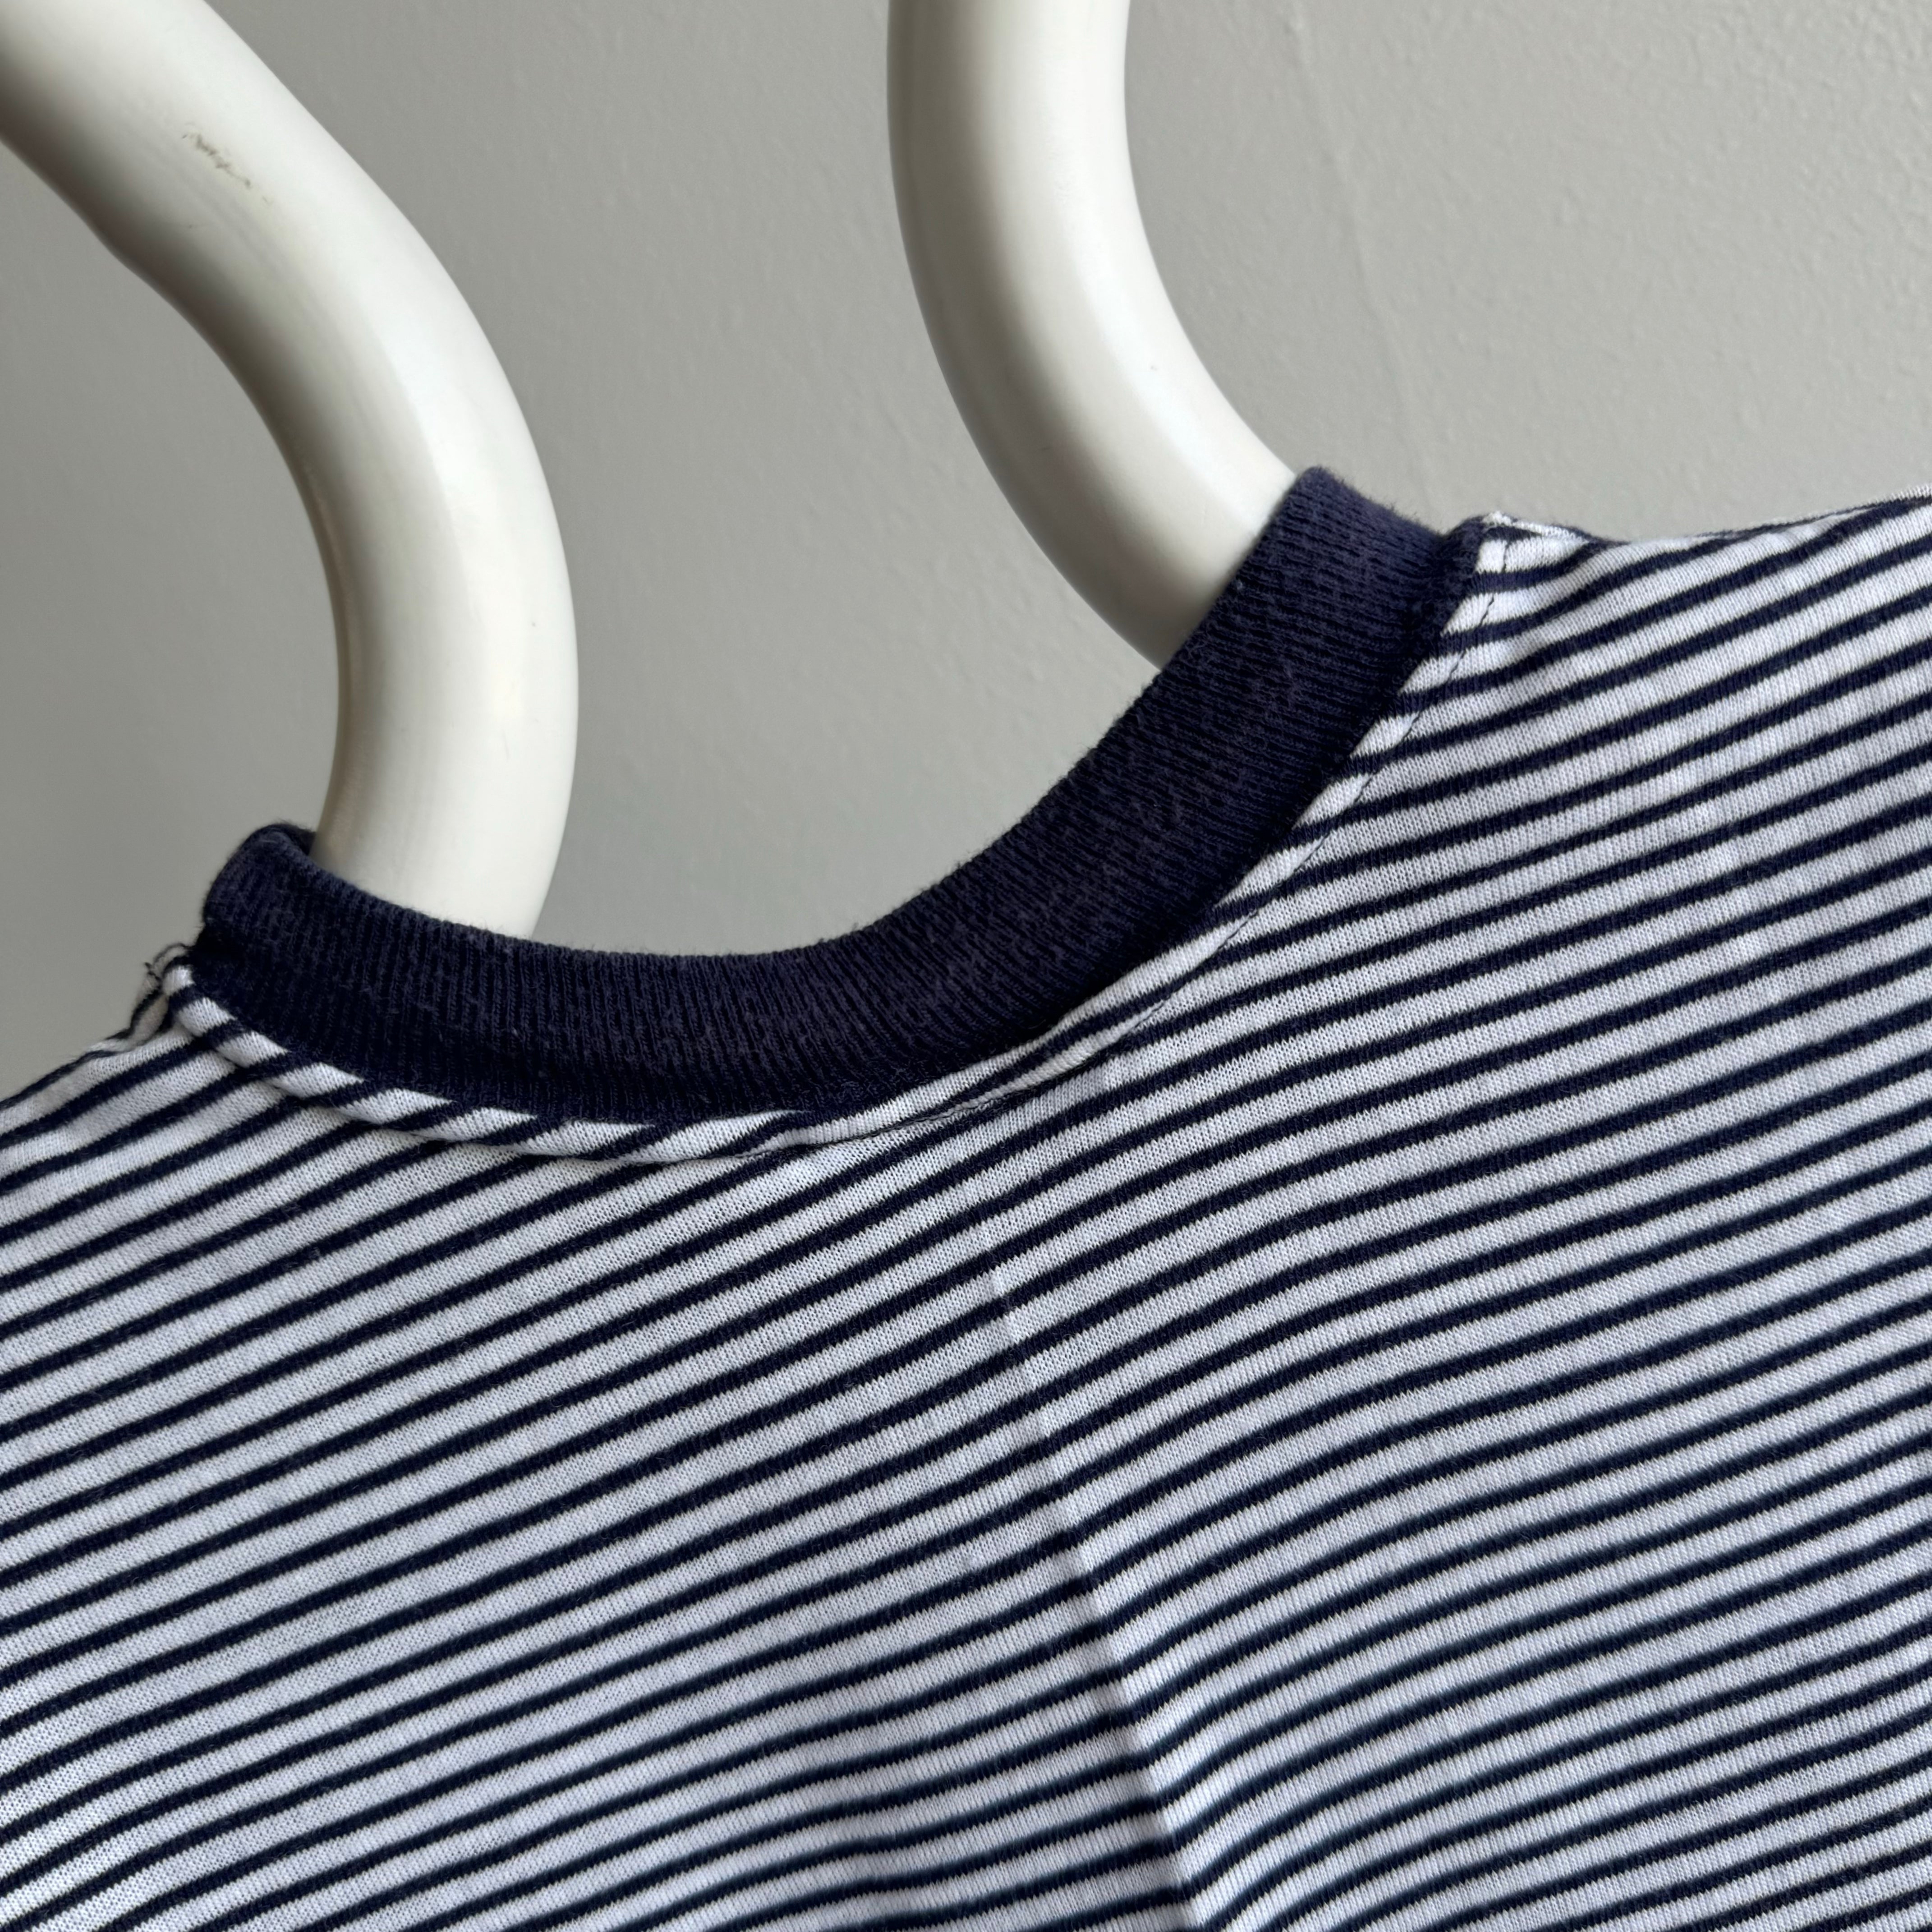 1970/80 Navy and White Striped Cotton Muscle Tank Top